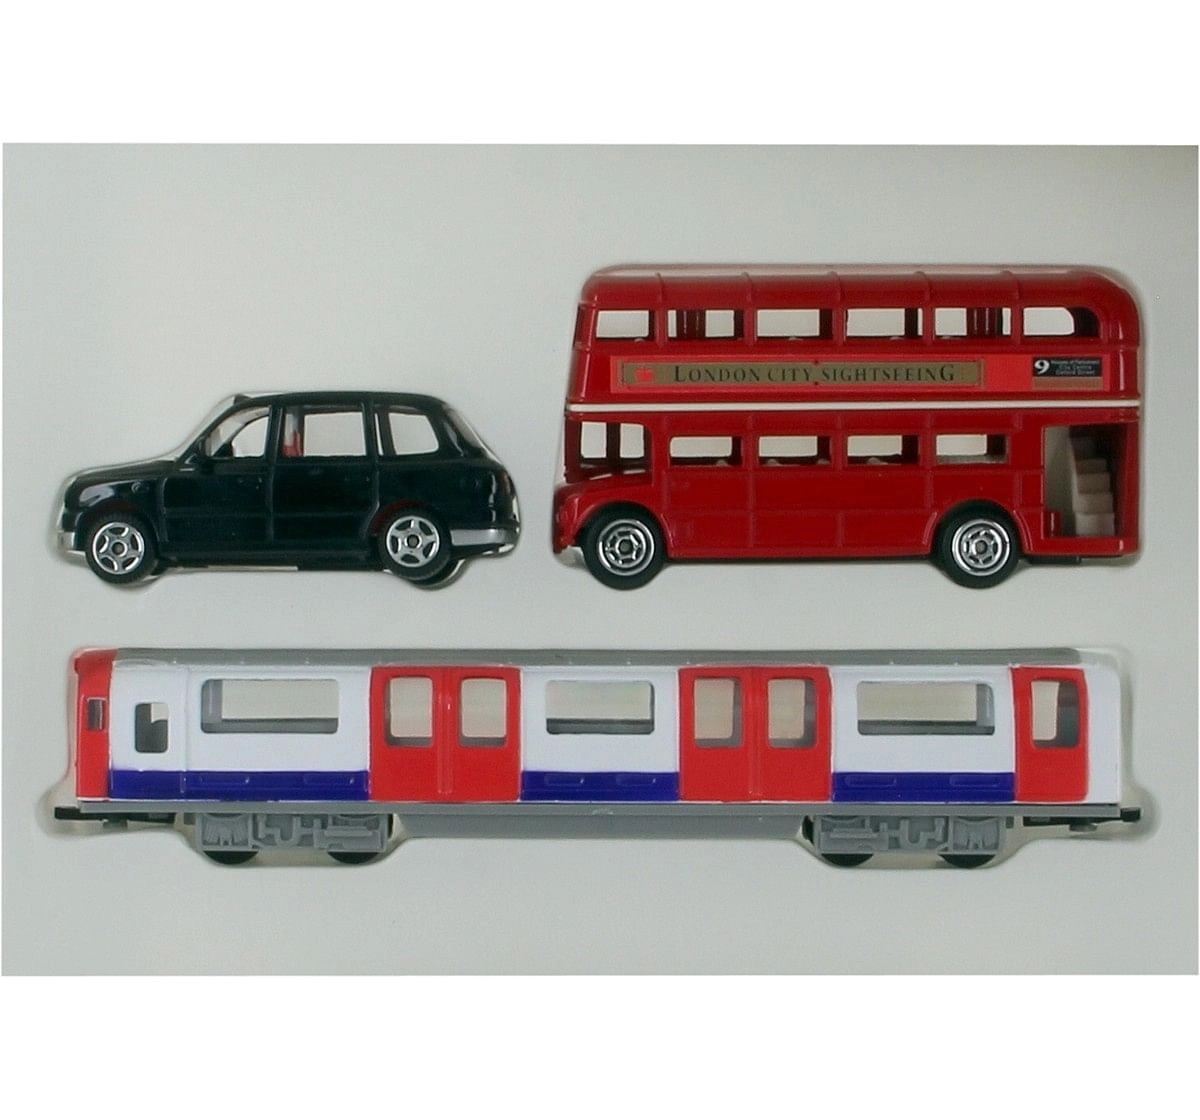 Hamleys London Vehicle Trio Pack (Bus/ Taxi/ Tube Carriage) Vehicles for Kids age 4Y+ 